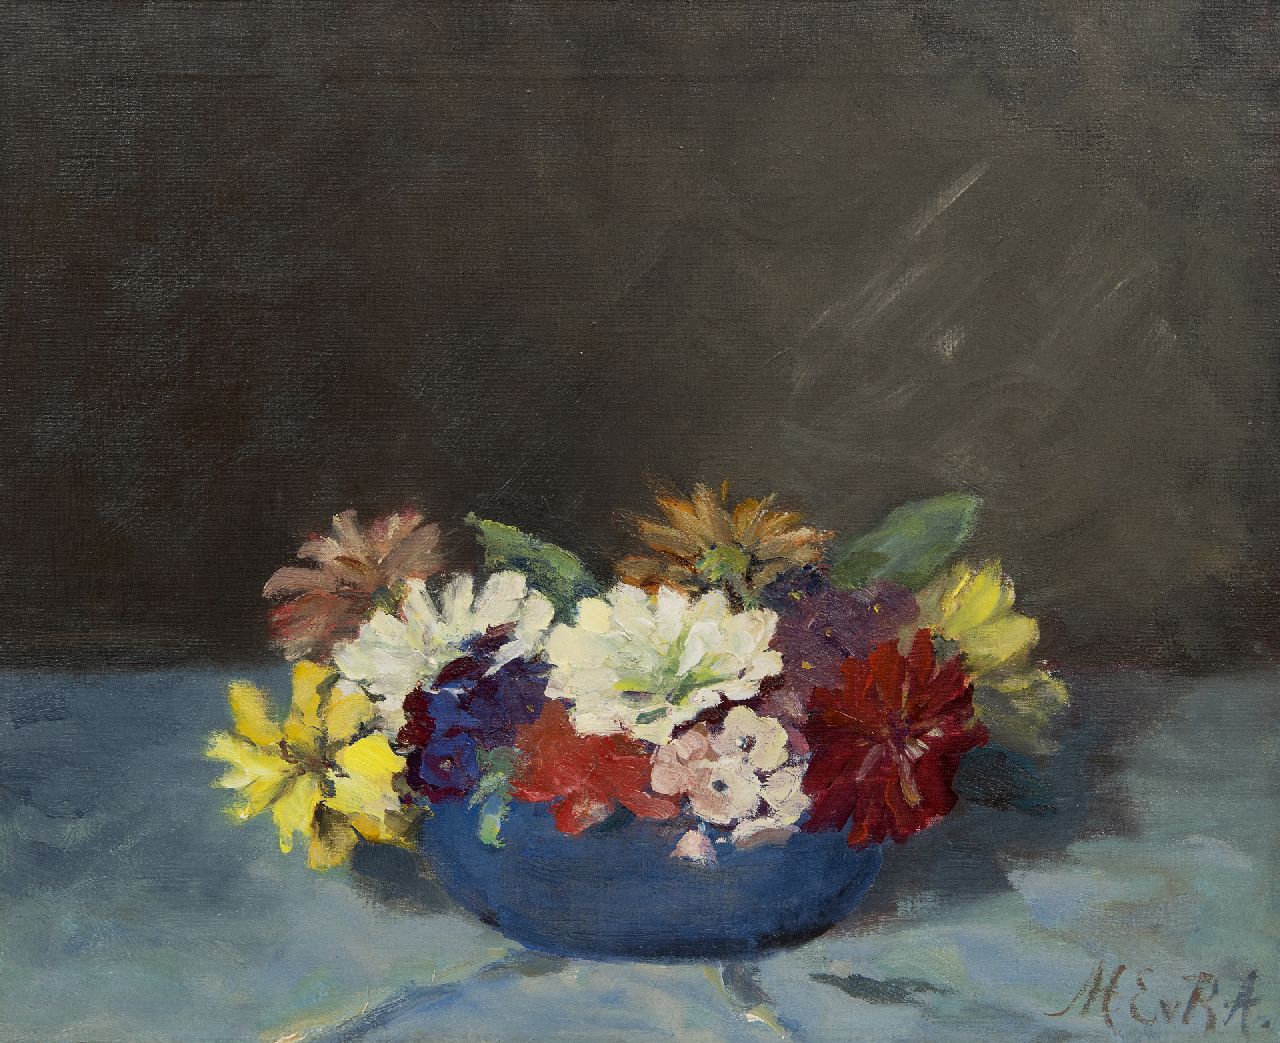 Regteren Altena M.E. van | 'Marie' Engelina van Regteren Altena | Paintings offered for sale | Zinnias, oil on canvas 39.2 x 48.3 cm, signed l.r. with initials